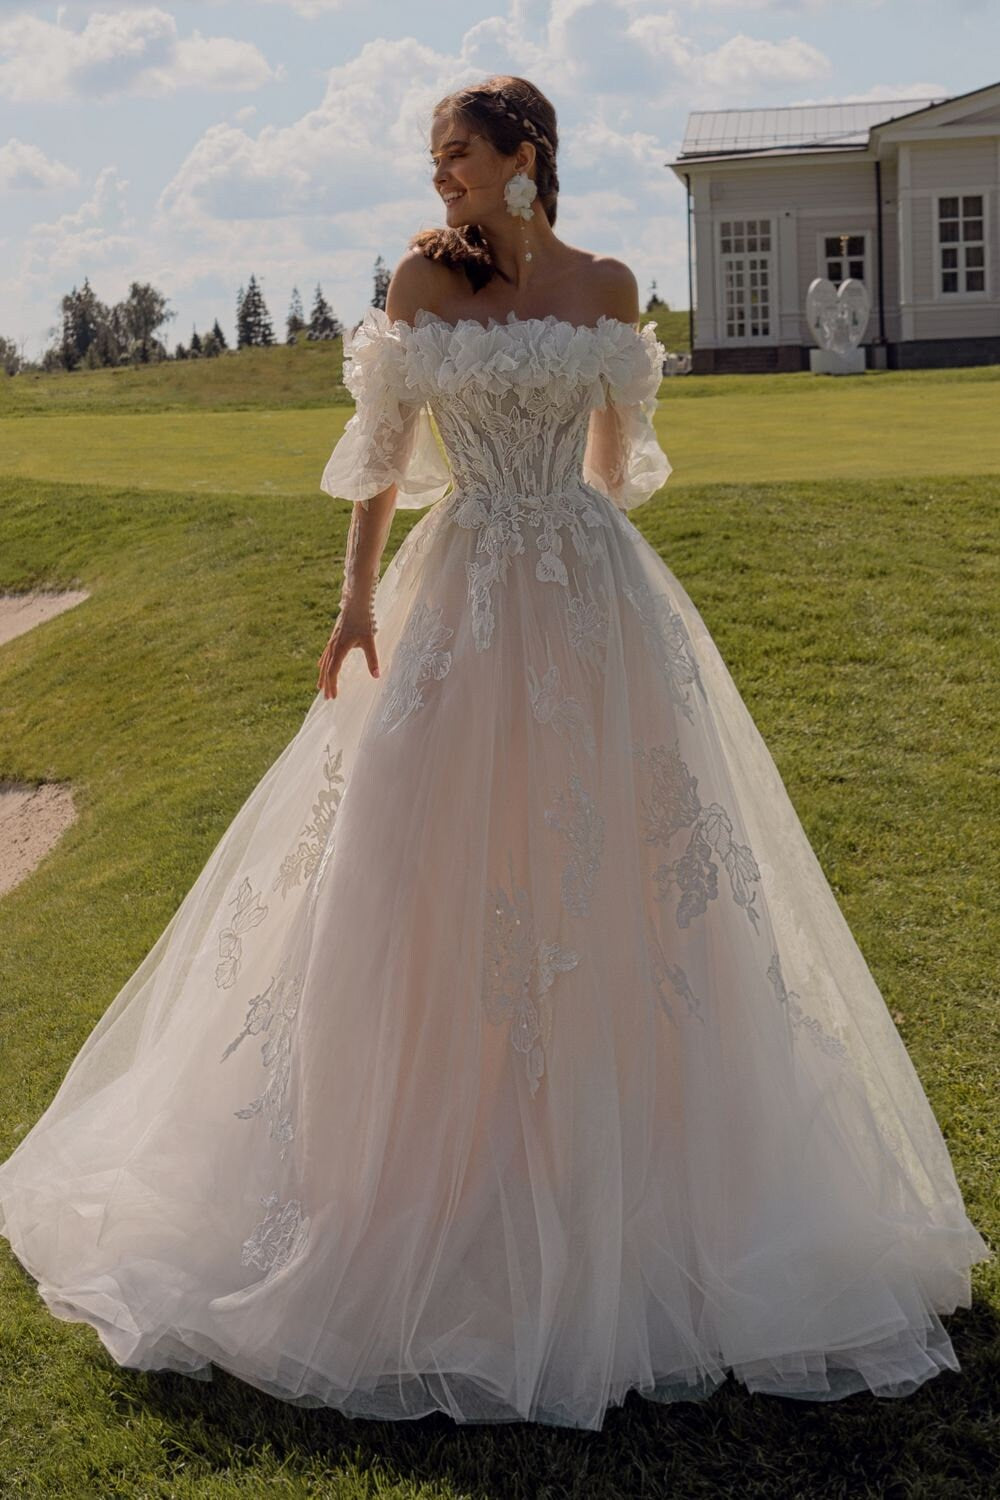 Modern Style Detachable Off the Shoulder Long Puff Sleeves Lace Wedding Dress Bridal Gown Aline Floral Lace Sleeveless Strapless Train